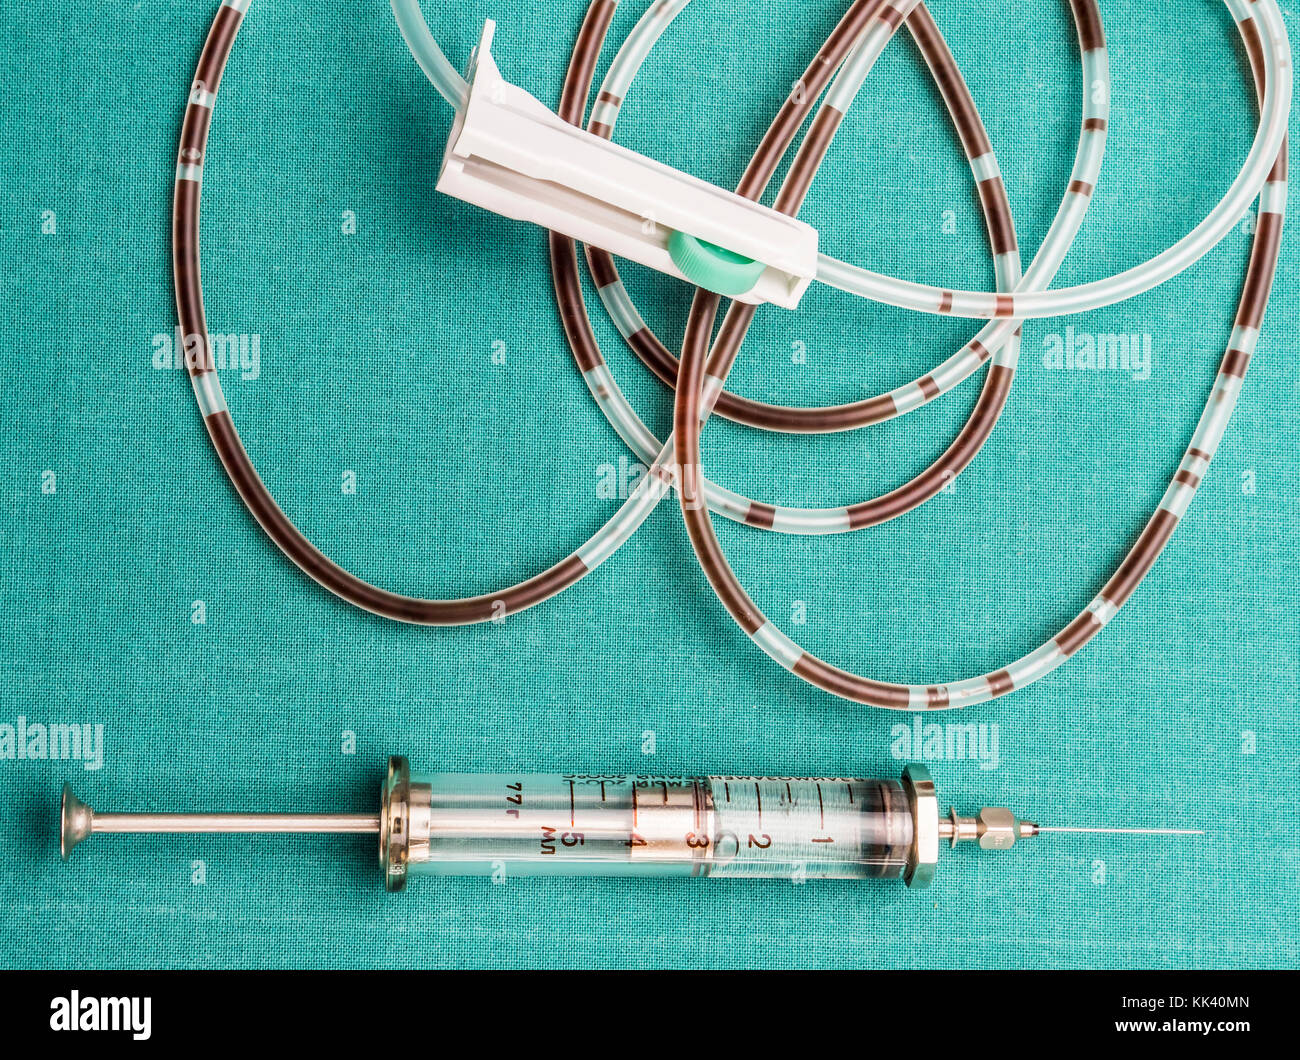 Drip irrigation system with traces of blood and vintage syringe, conceptual image Stock Photo